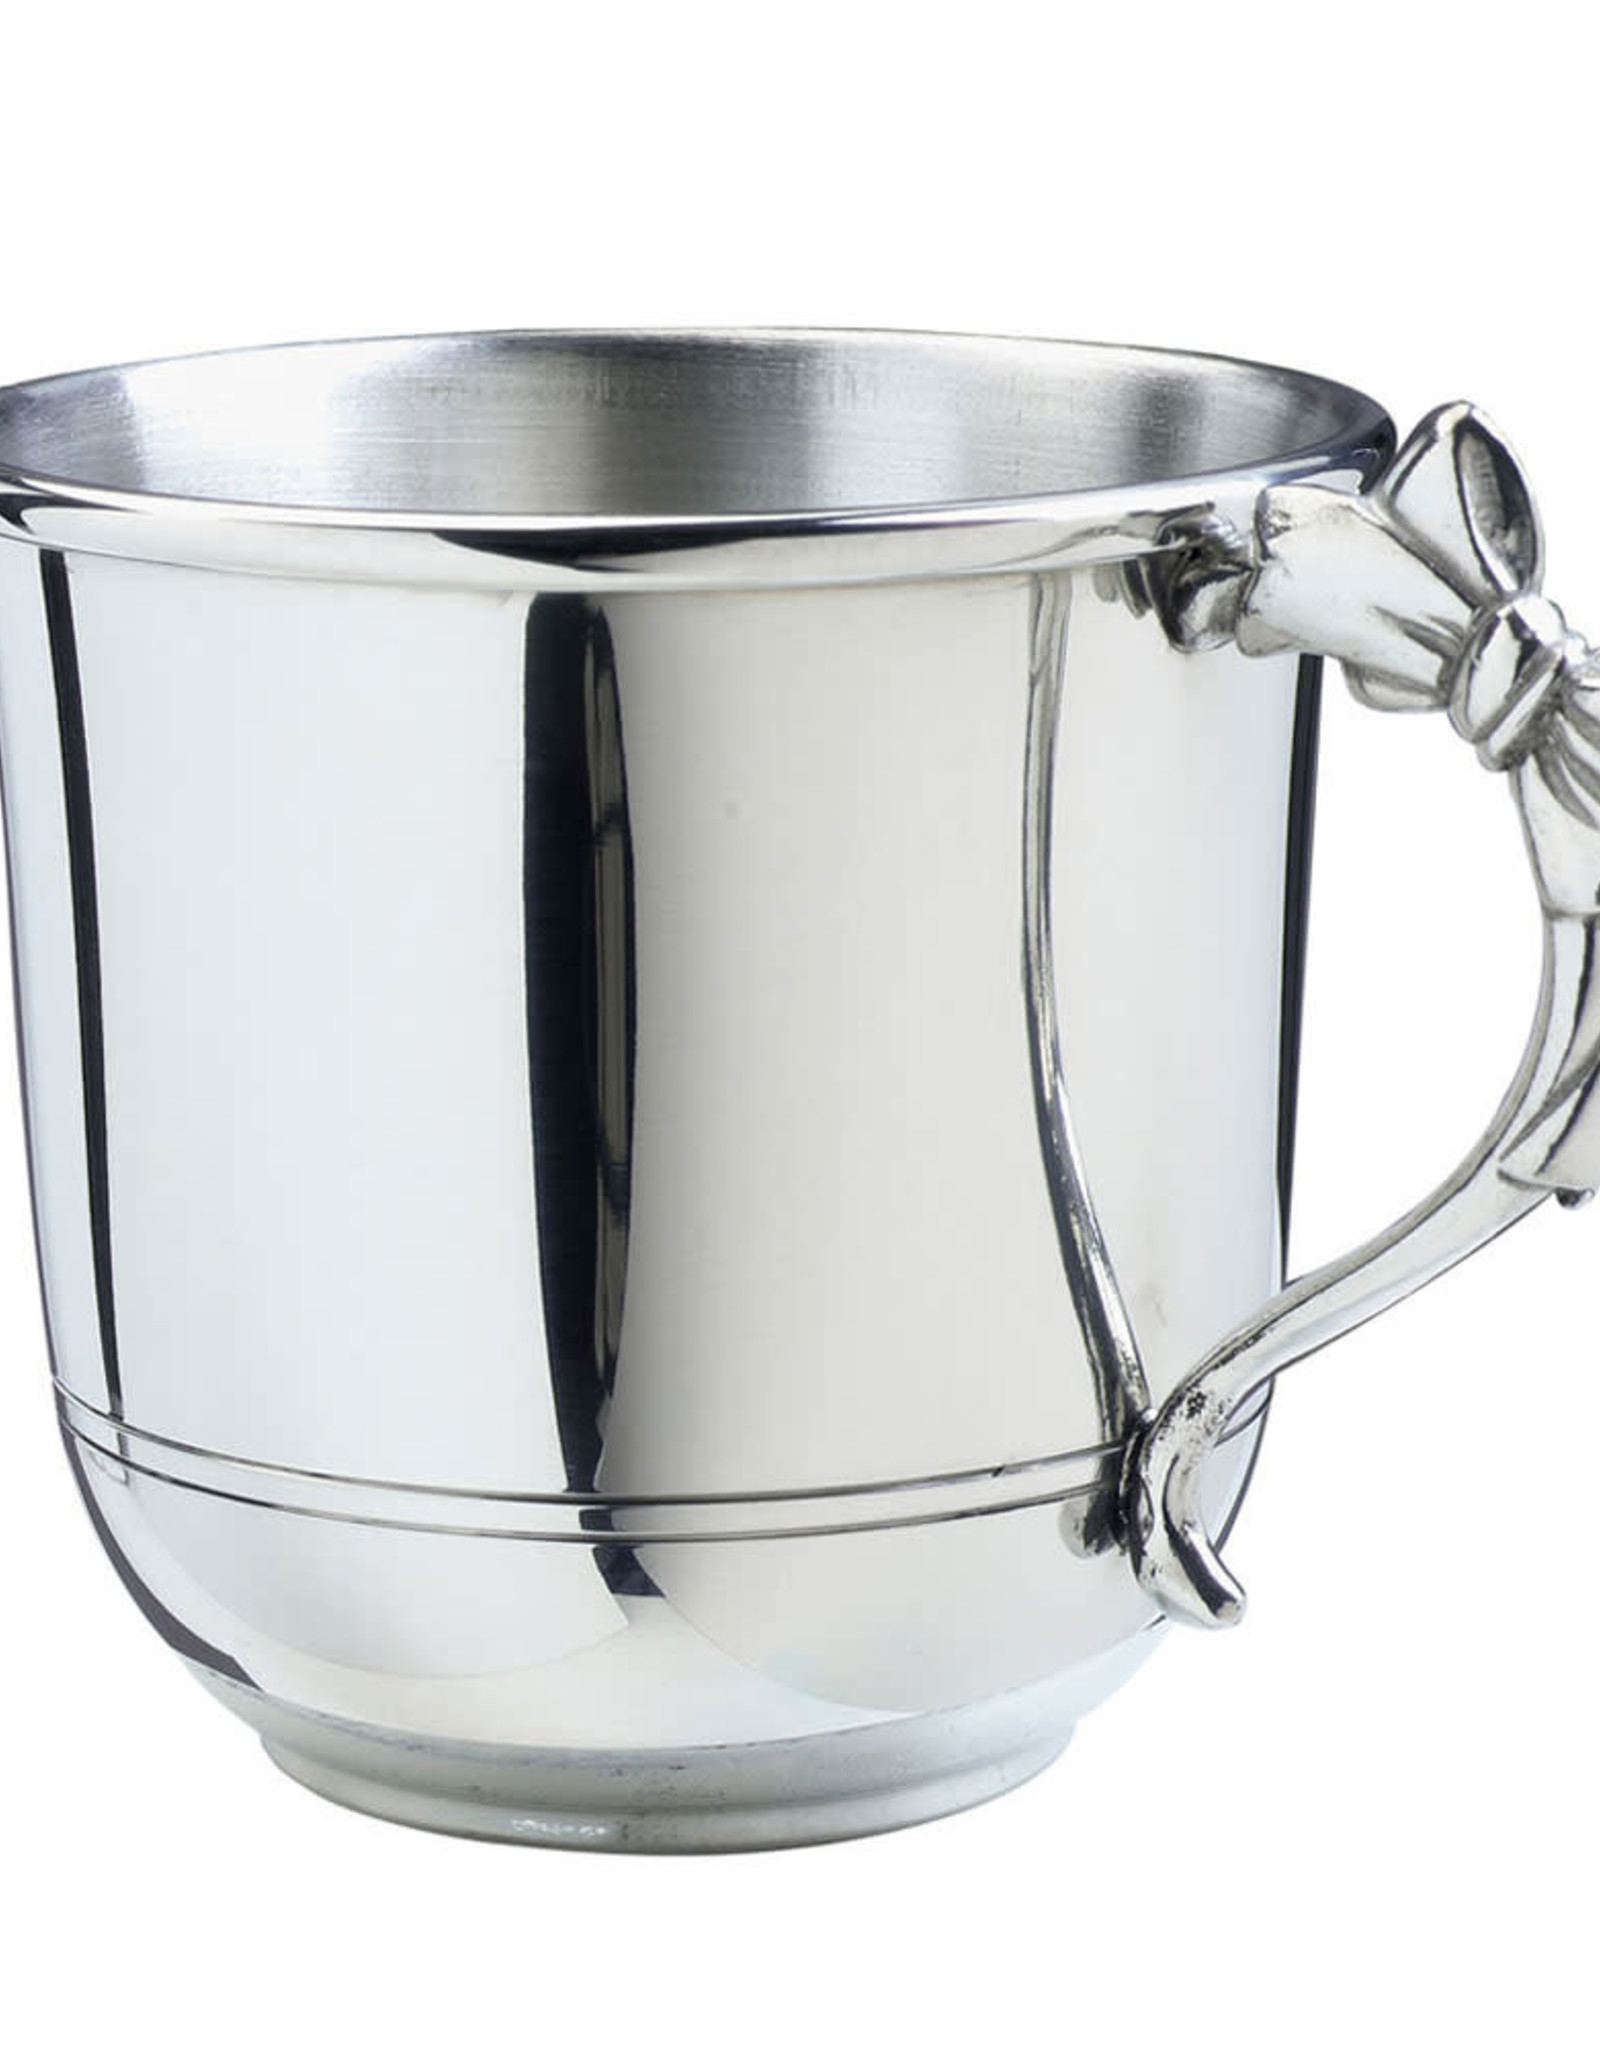 Salisbuy Pewter Pewter Baby Cup w/ Bow Handle